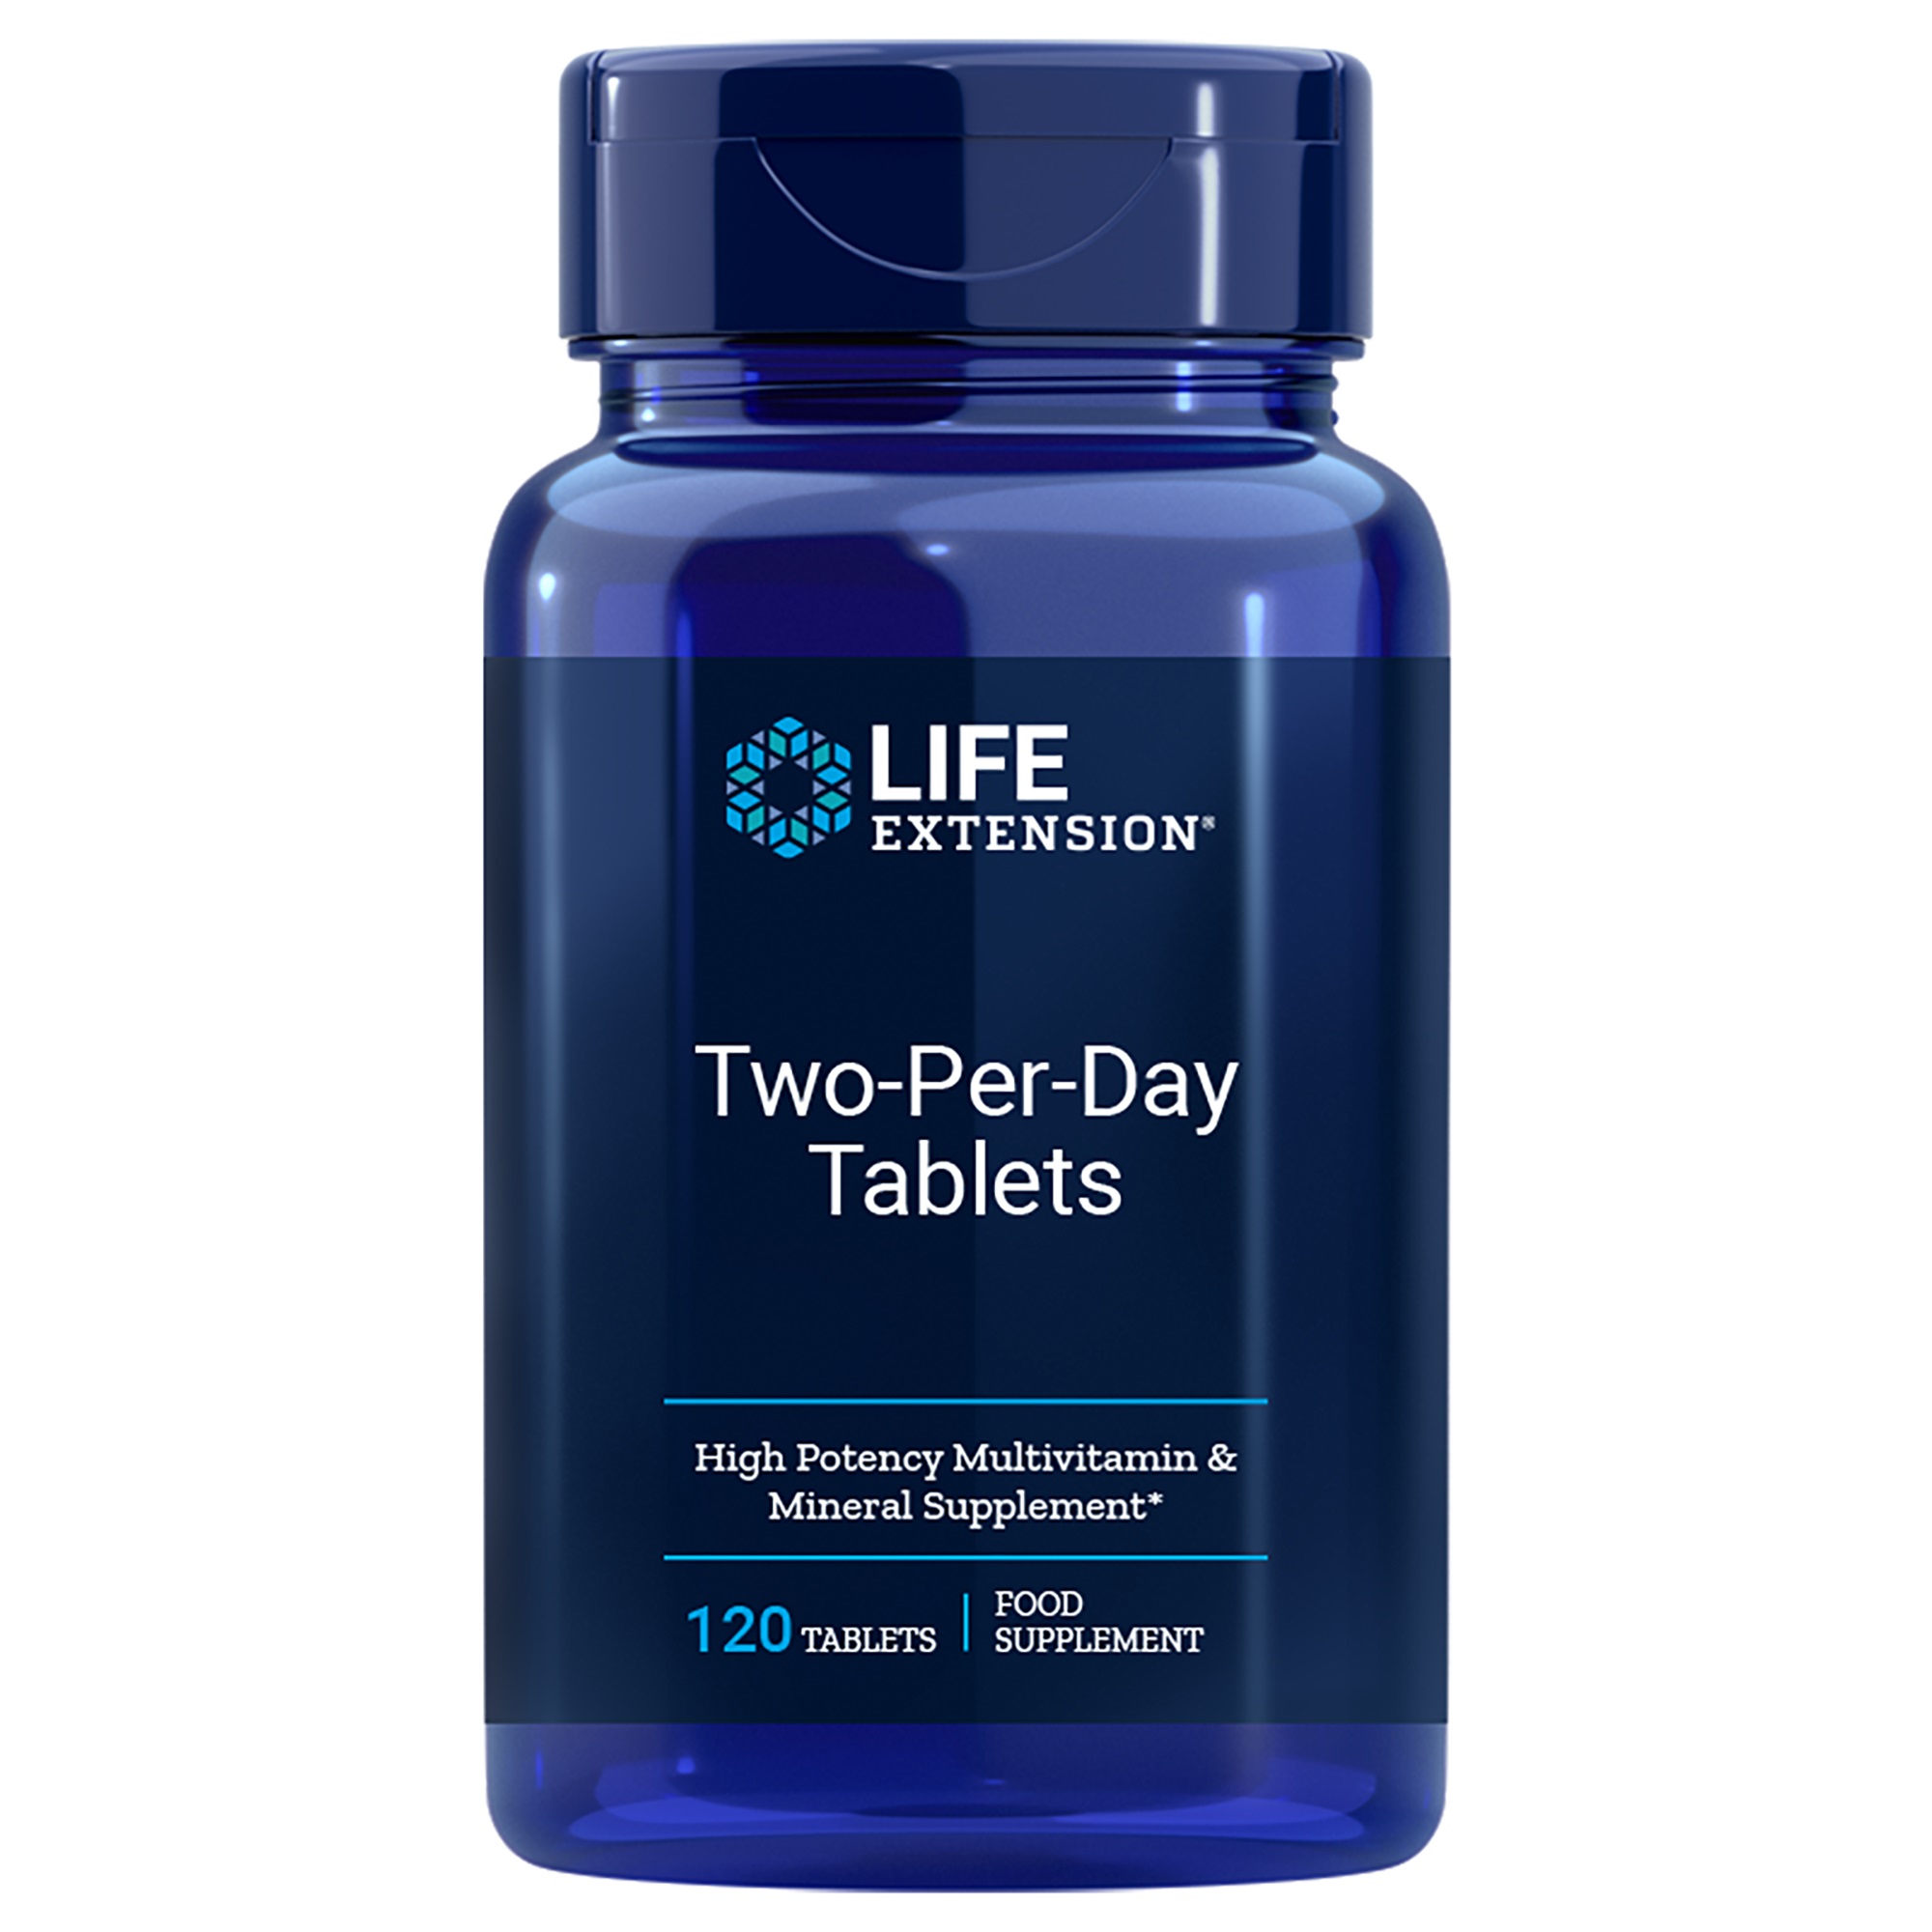 LifeExtension Two-Per-Day Tablets